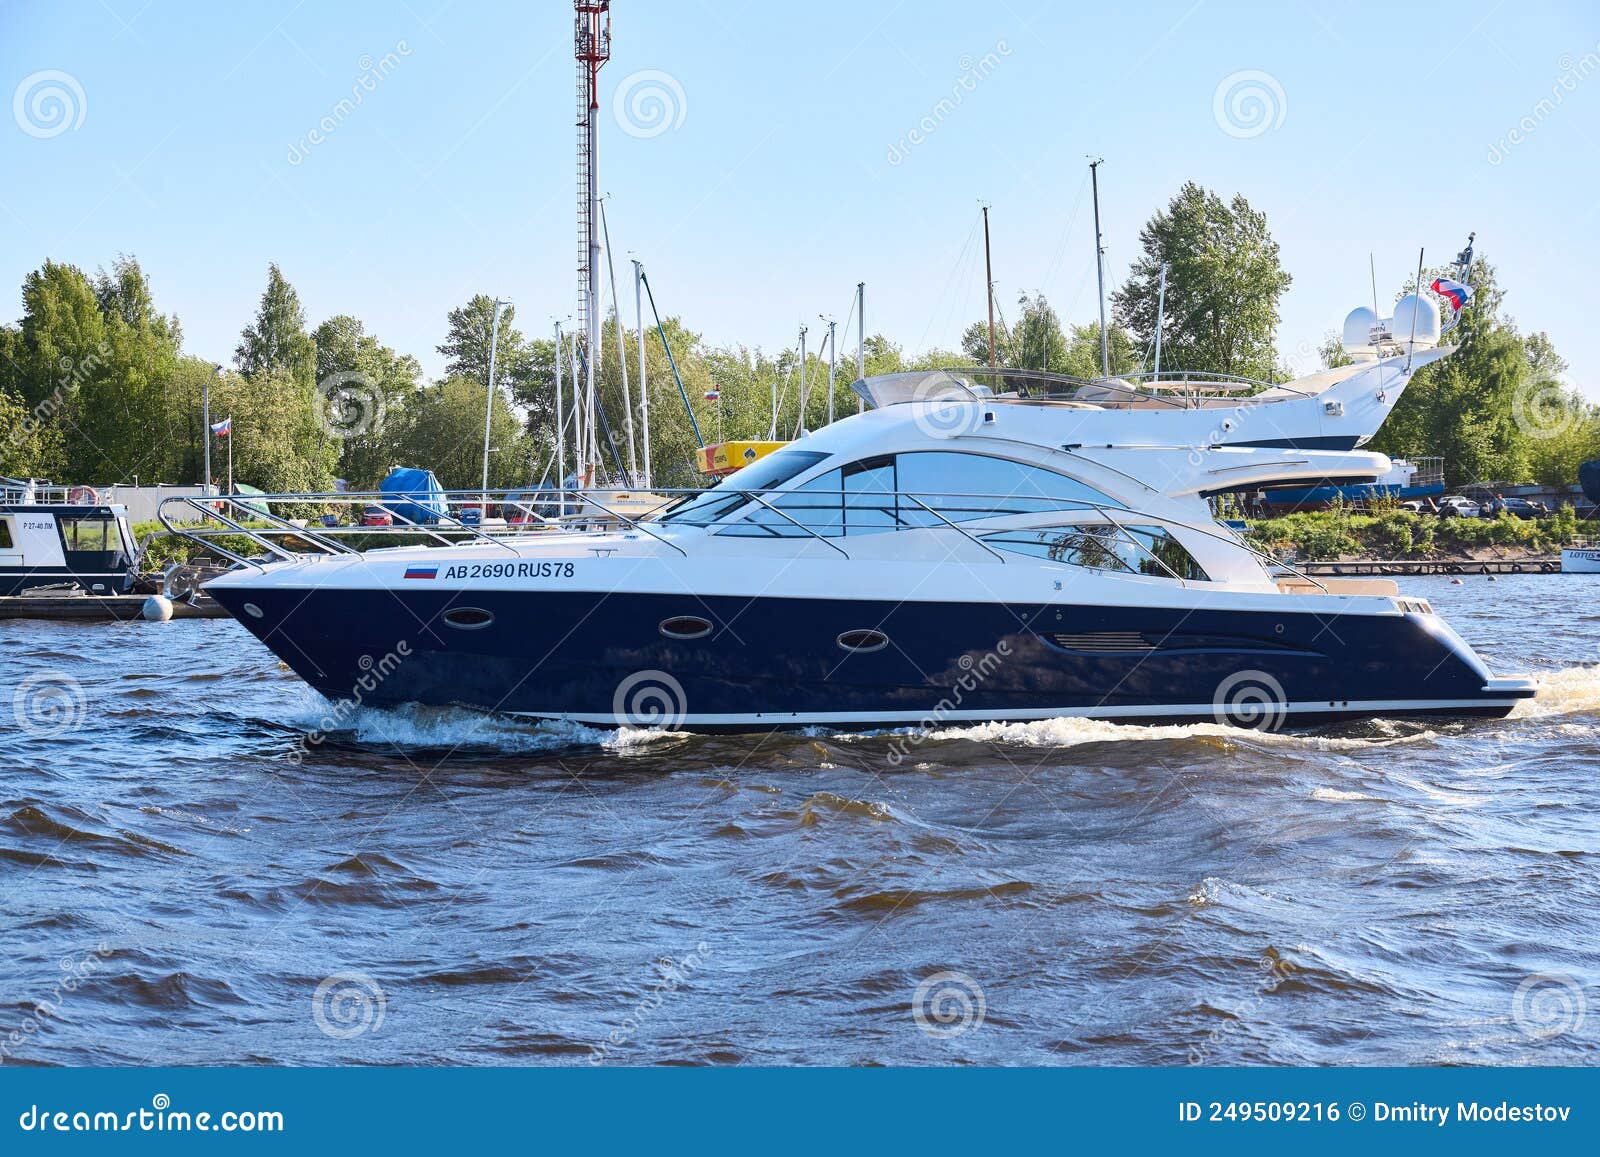 View Of The Yacht Floating On The Water Editorial Photo Image Of Tourism Vacation